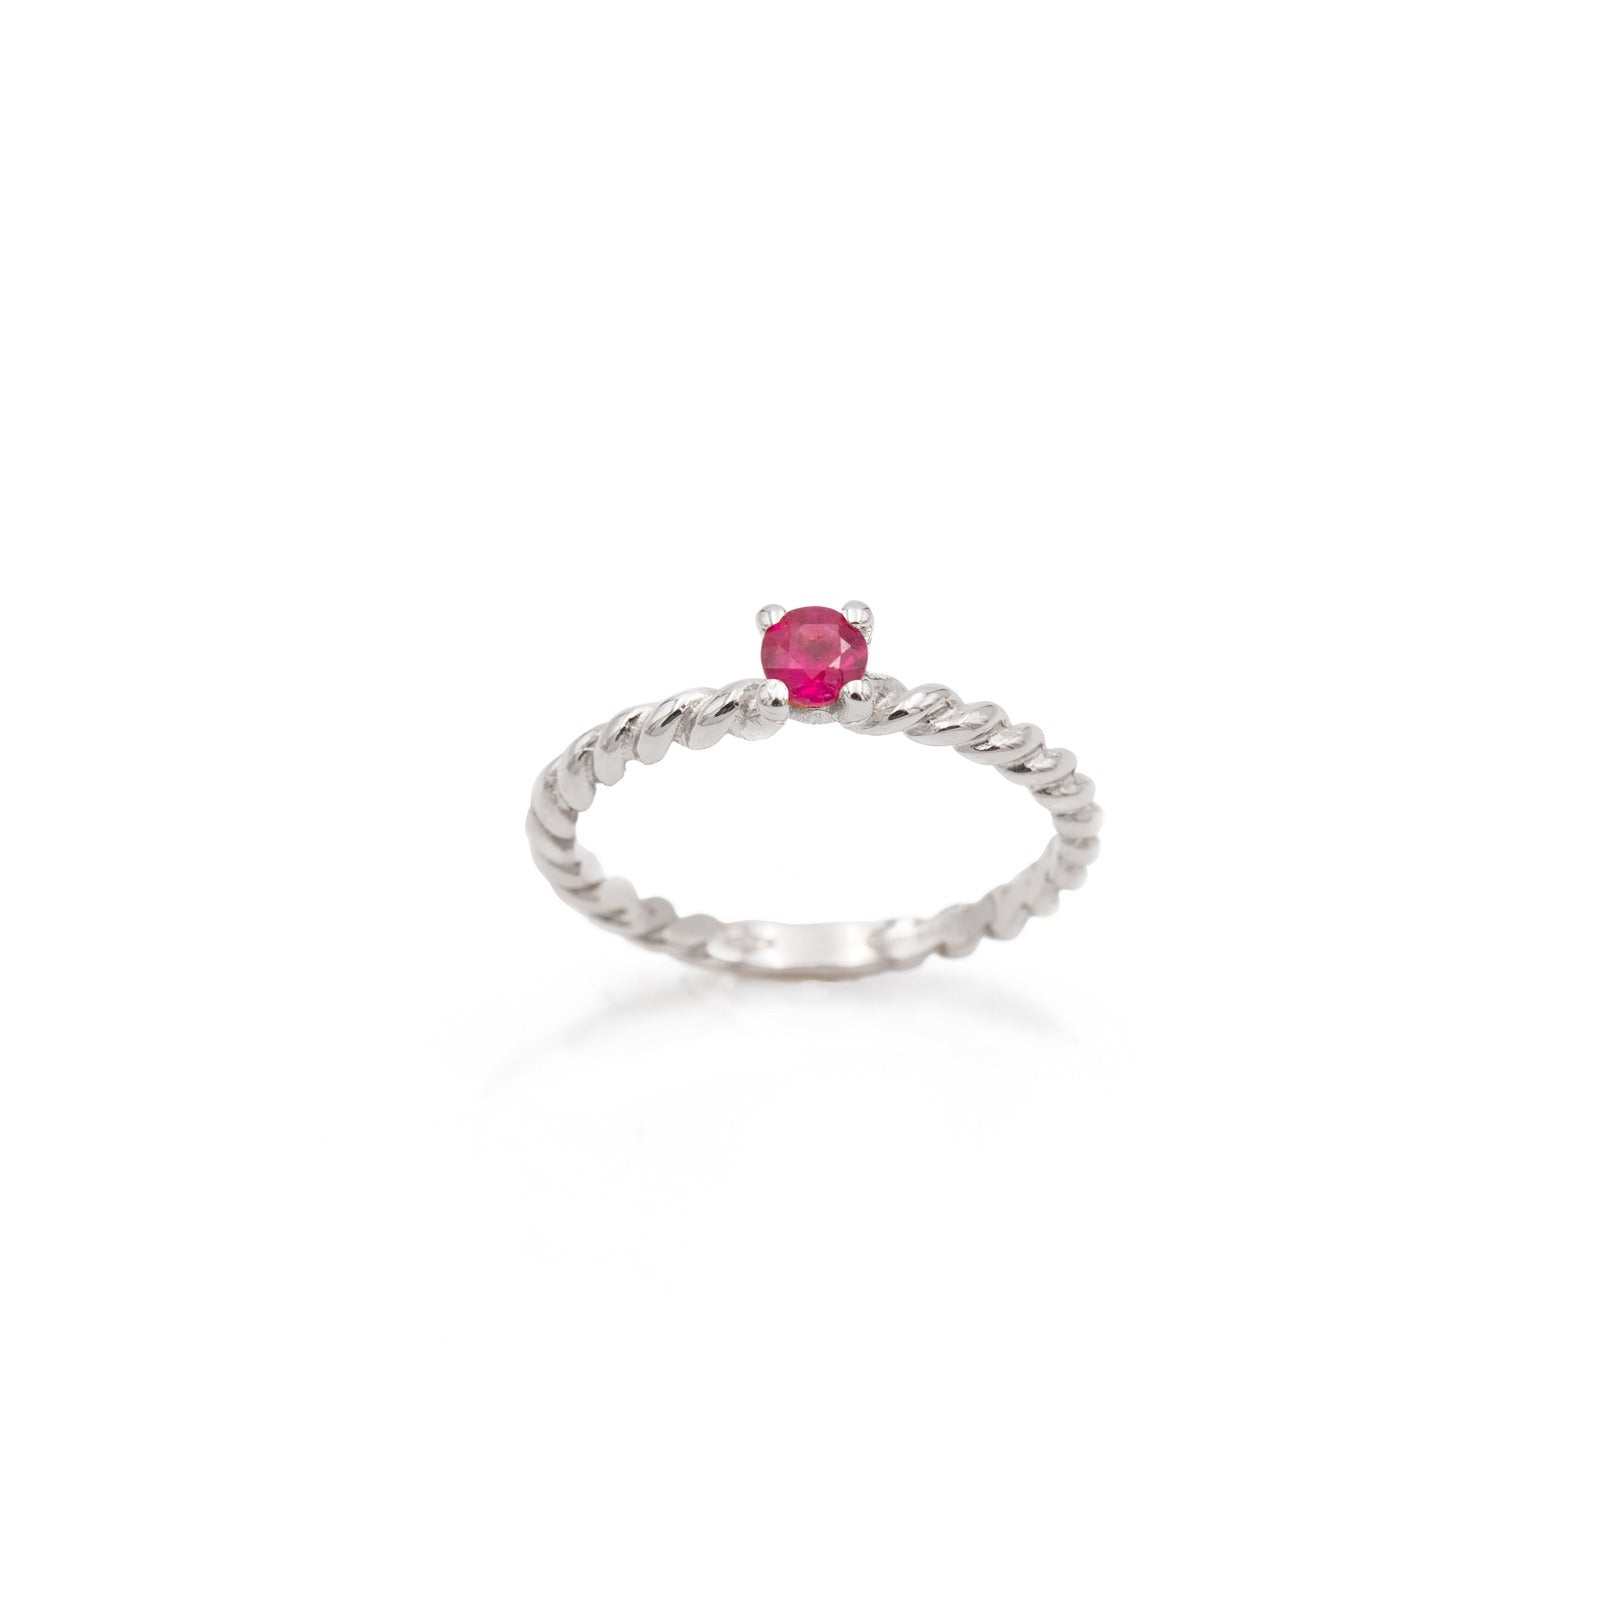 White gold braided ring with central ruby